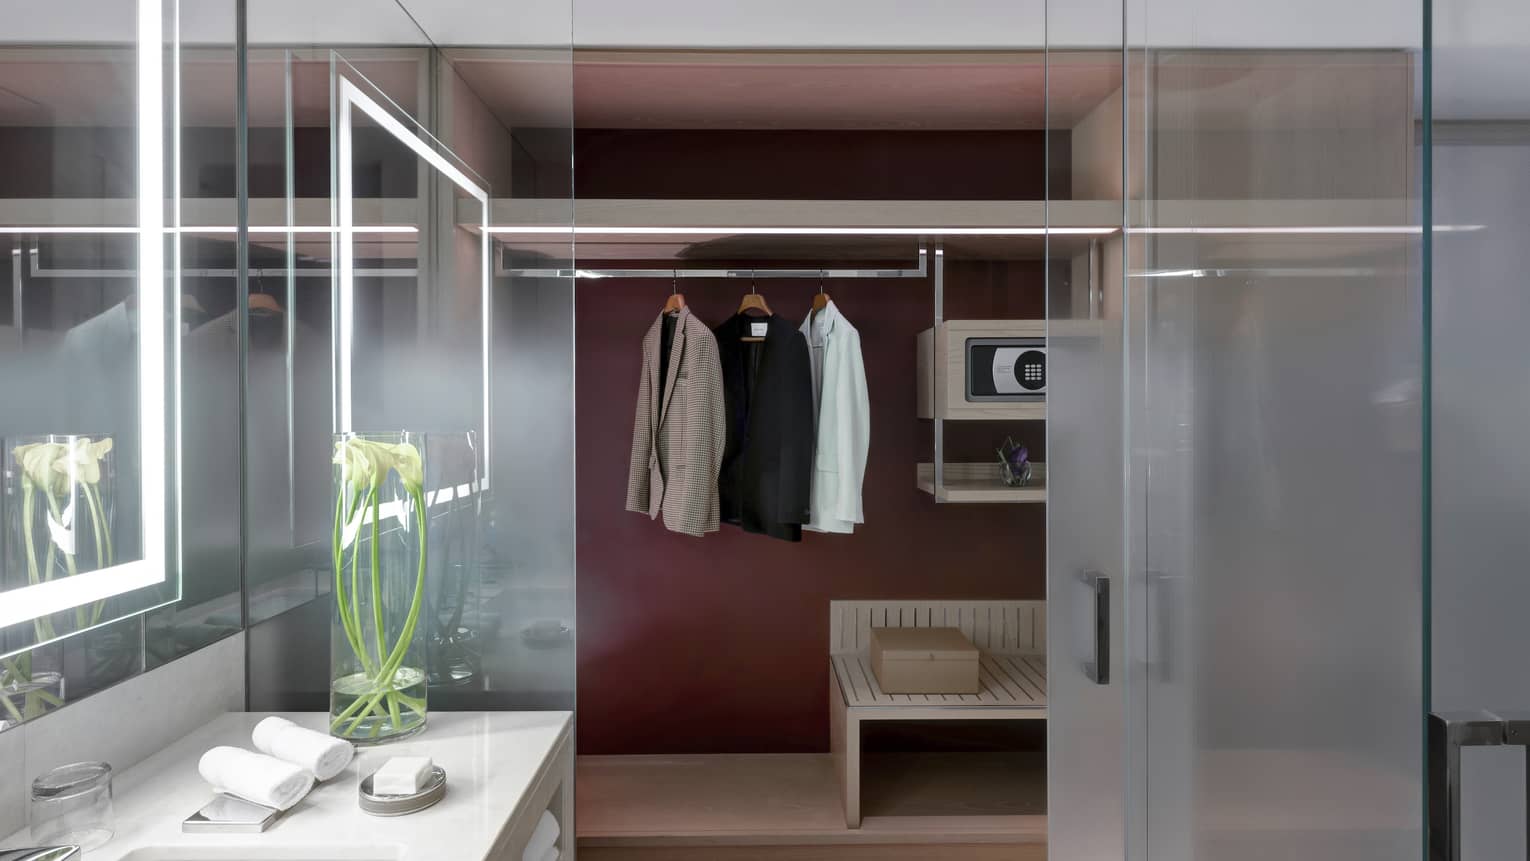 Bathroom opening to a closet